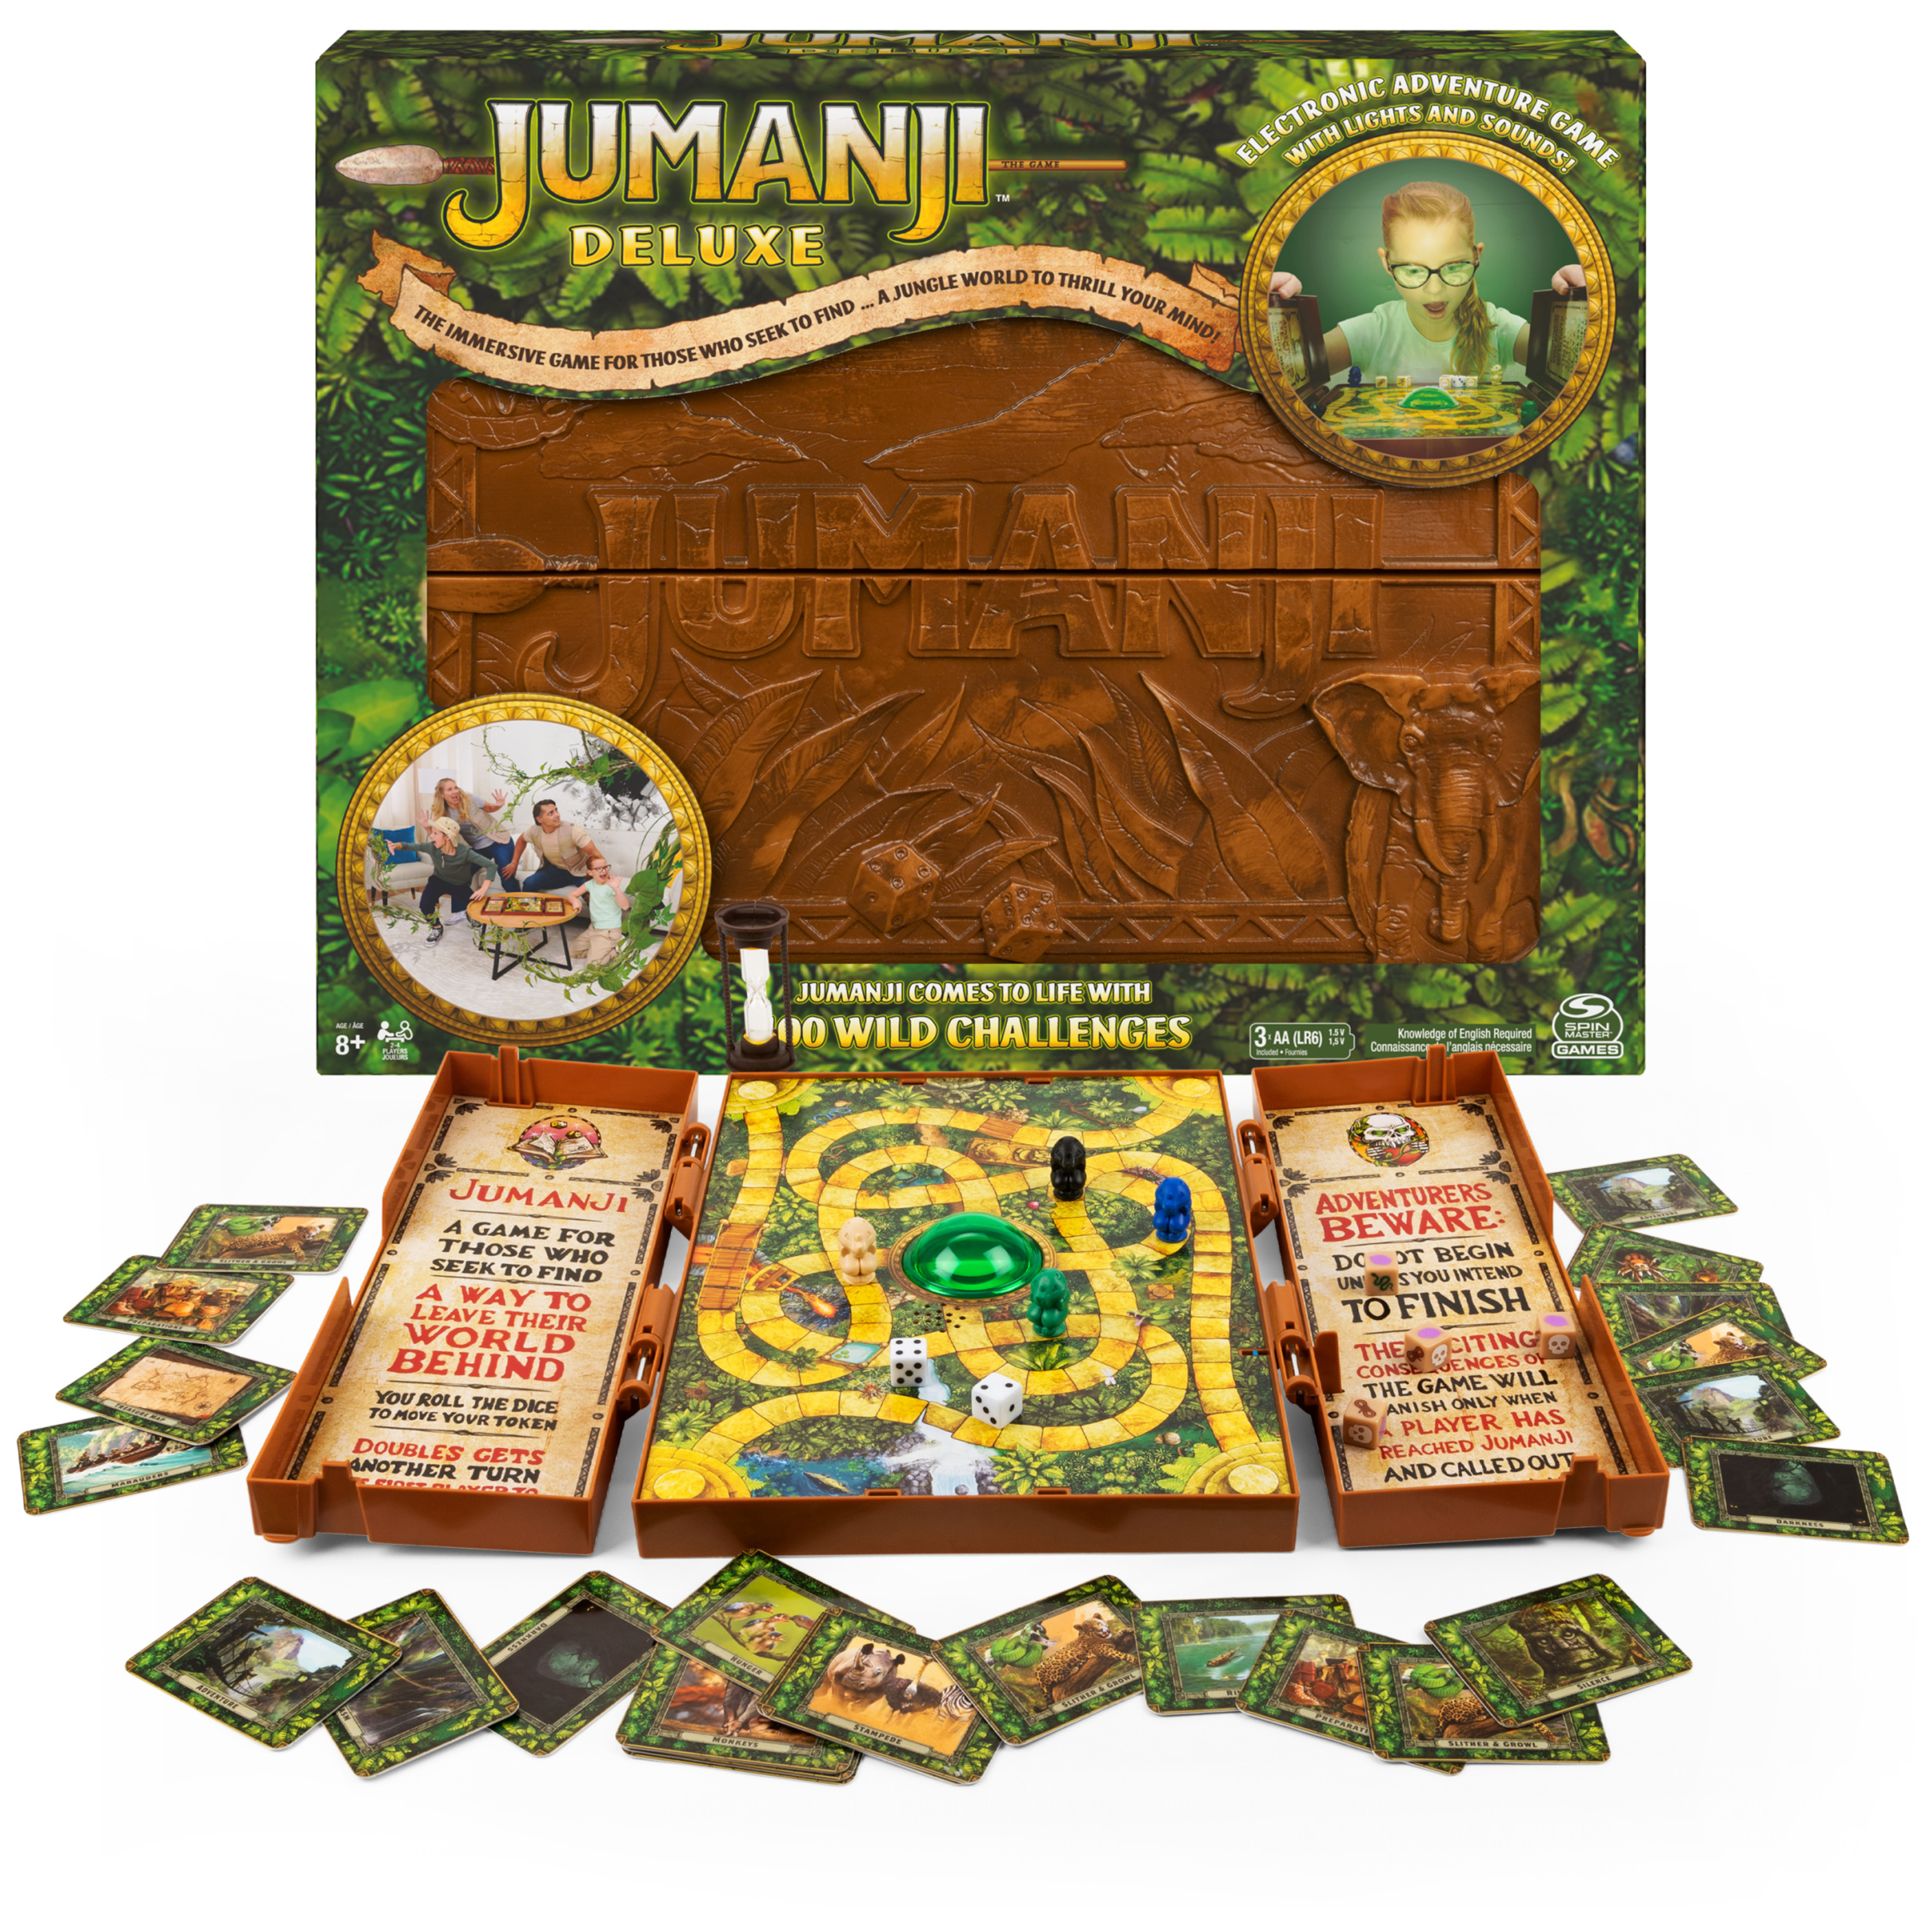 Jumanji Deluxe Game, Immersive Electronic Version of The Classic Adventure Movie Board Game, With Lights and Sounds, Family Game Night Game for Kids & Adults Ages 8 and up - image 1 of 9